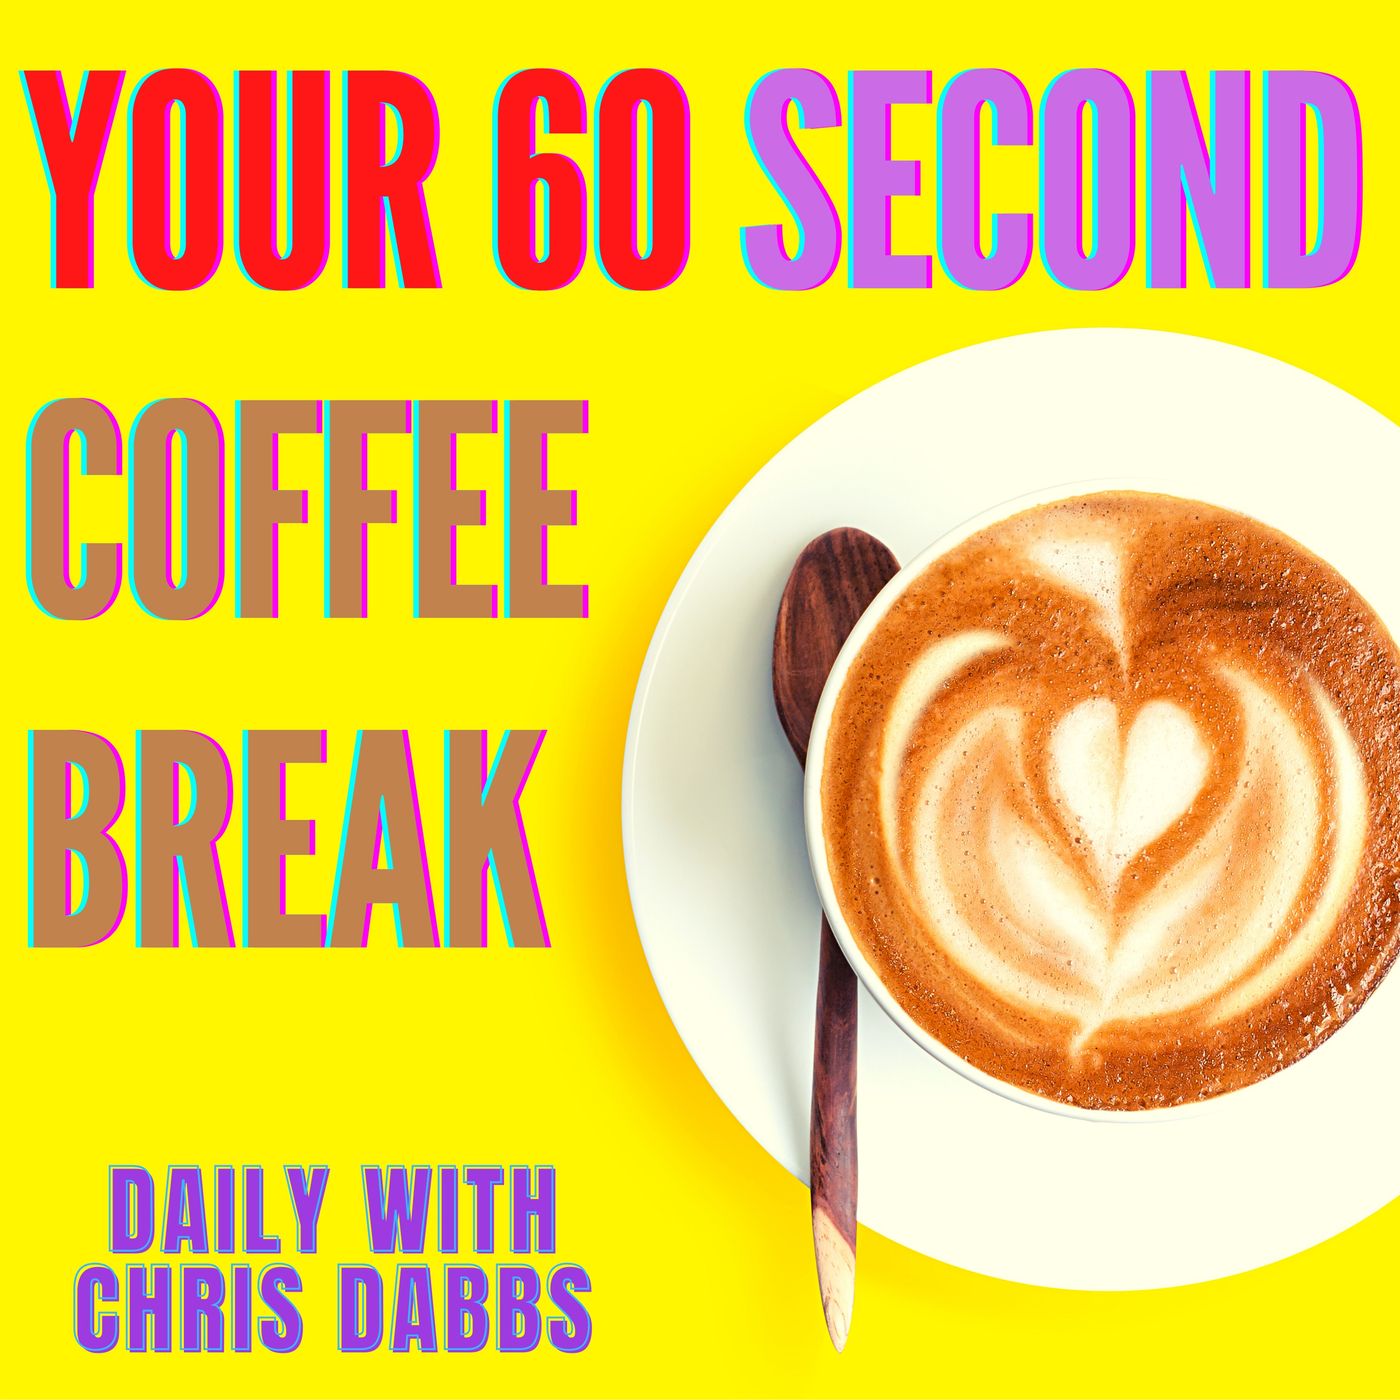 Your 60 second coffee break - daily with Chris Dabbs Album Art